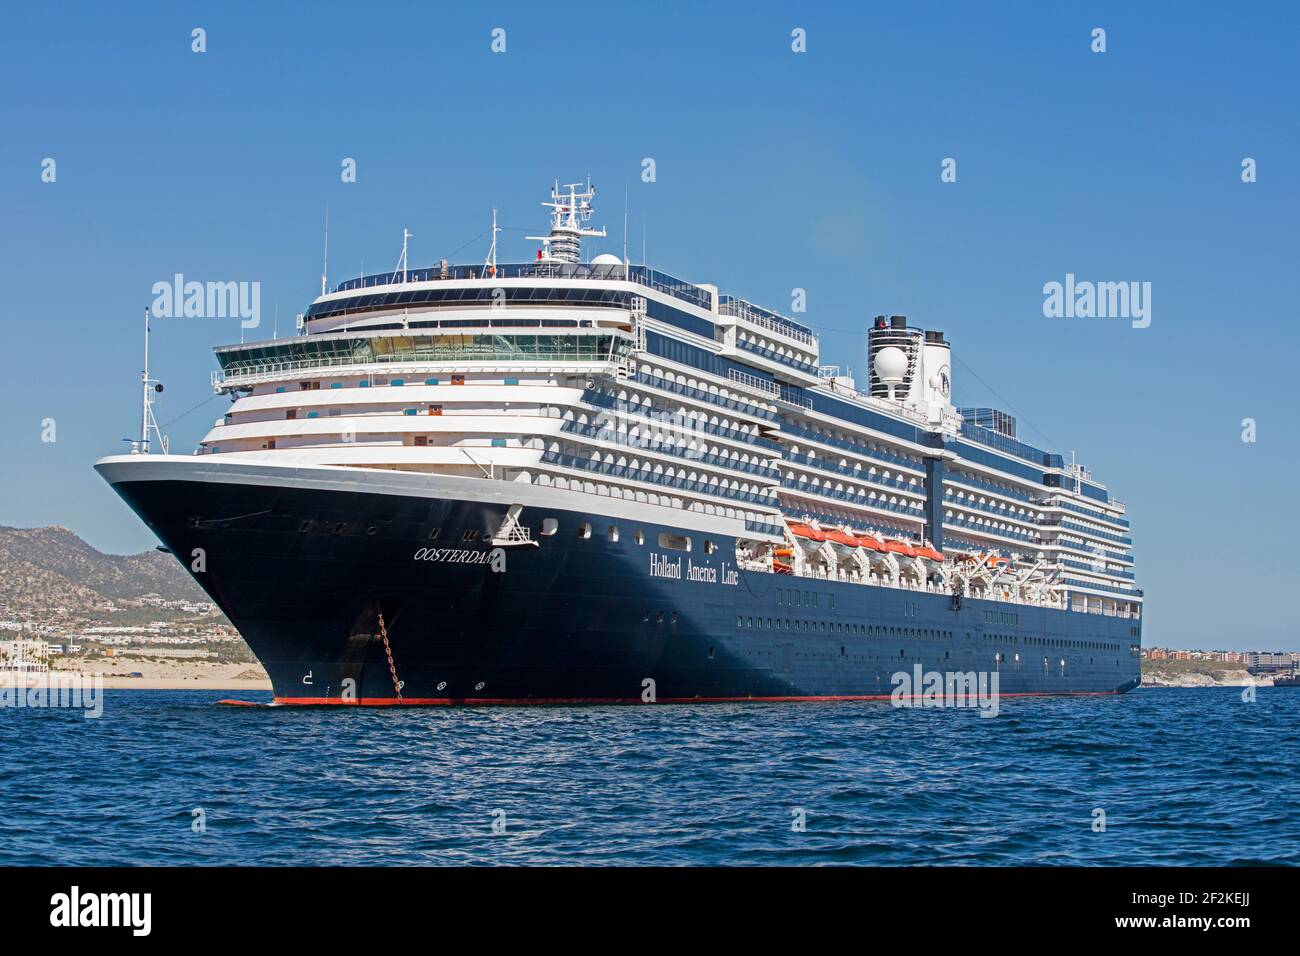 MS Oosterdam, Vista class cruise ship of the Holland America Line moored at the city Cabo San Lucas on the peninsula of Baja California Sur, Mexico Stock Photo